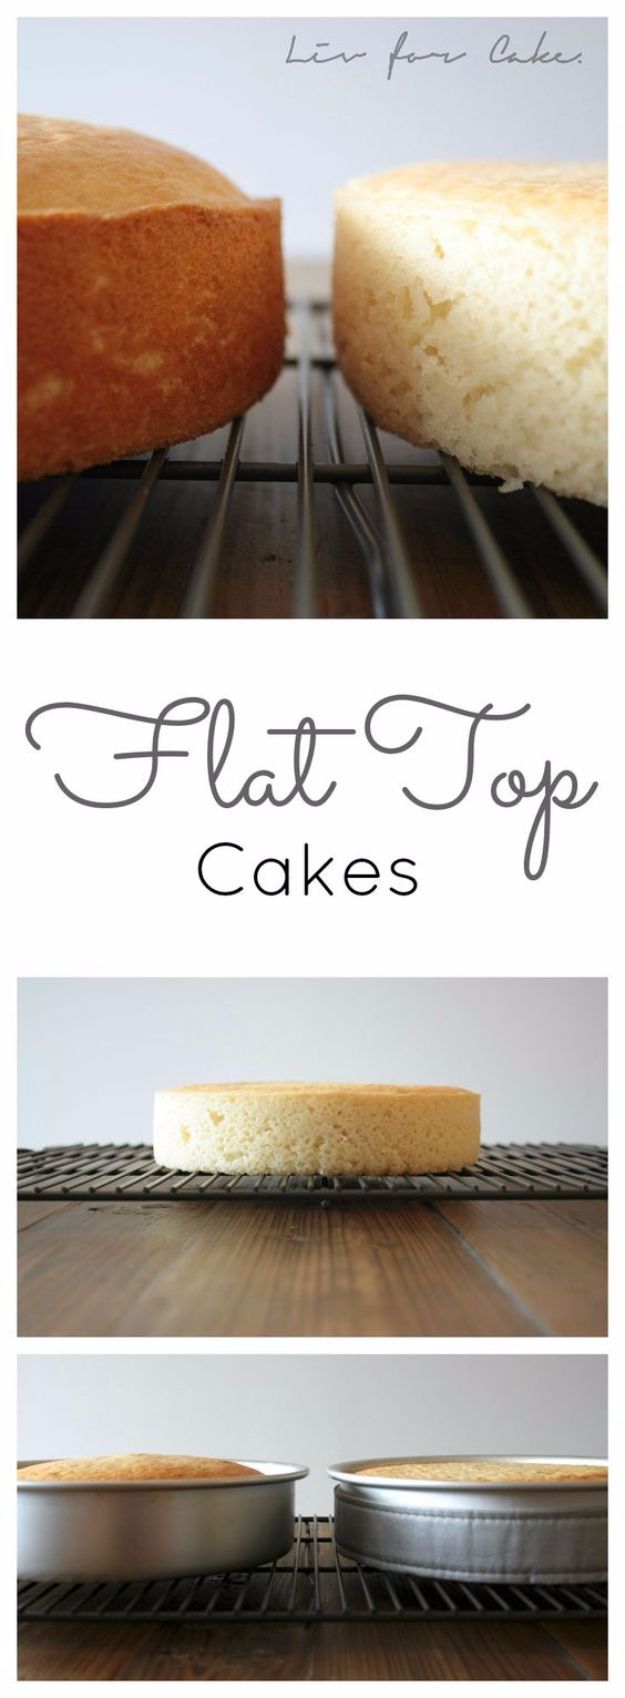 Baking Hacks - Flat Top Cakes - A List of Easy Hacks For Your Favorite Baking Recipes - Simple Tips and Tricks To Use When You Bake - Quick Ways to Bake Cake, Cupcakes, Desserts and Cookies - Best Kitchen Lifehacks for Bakers Favorite DIY Recipe 